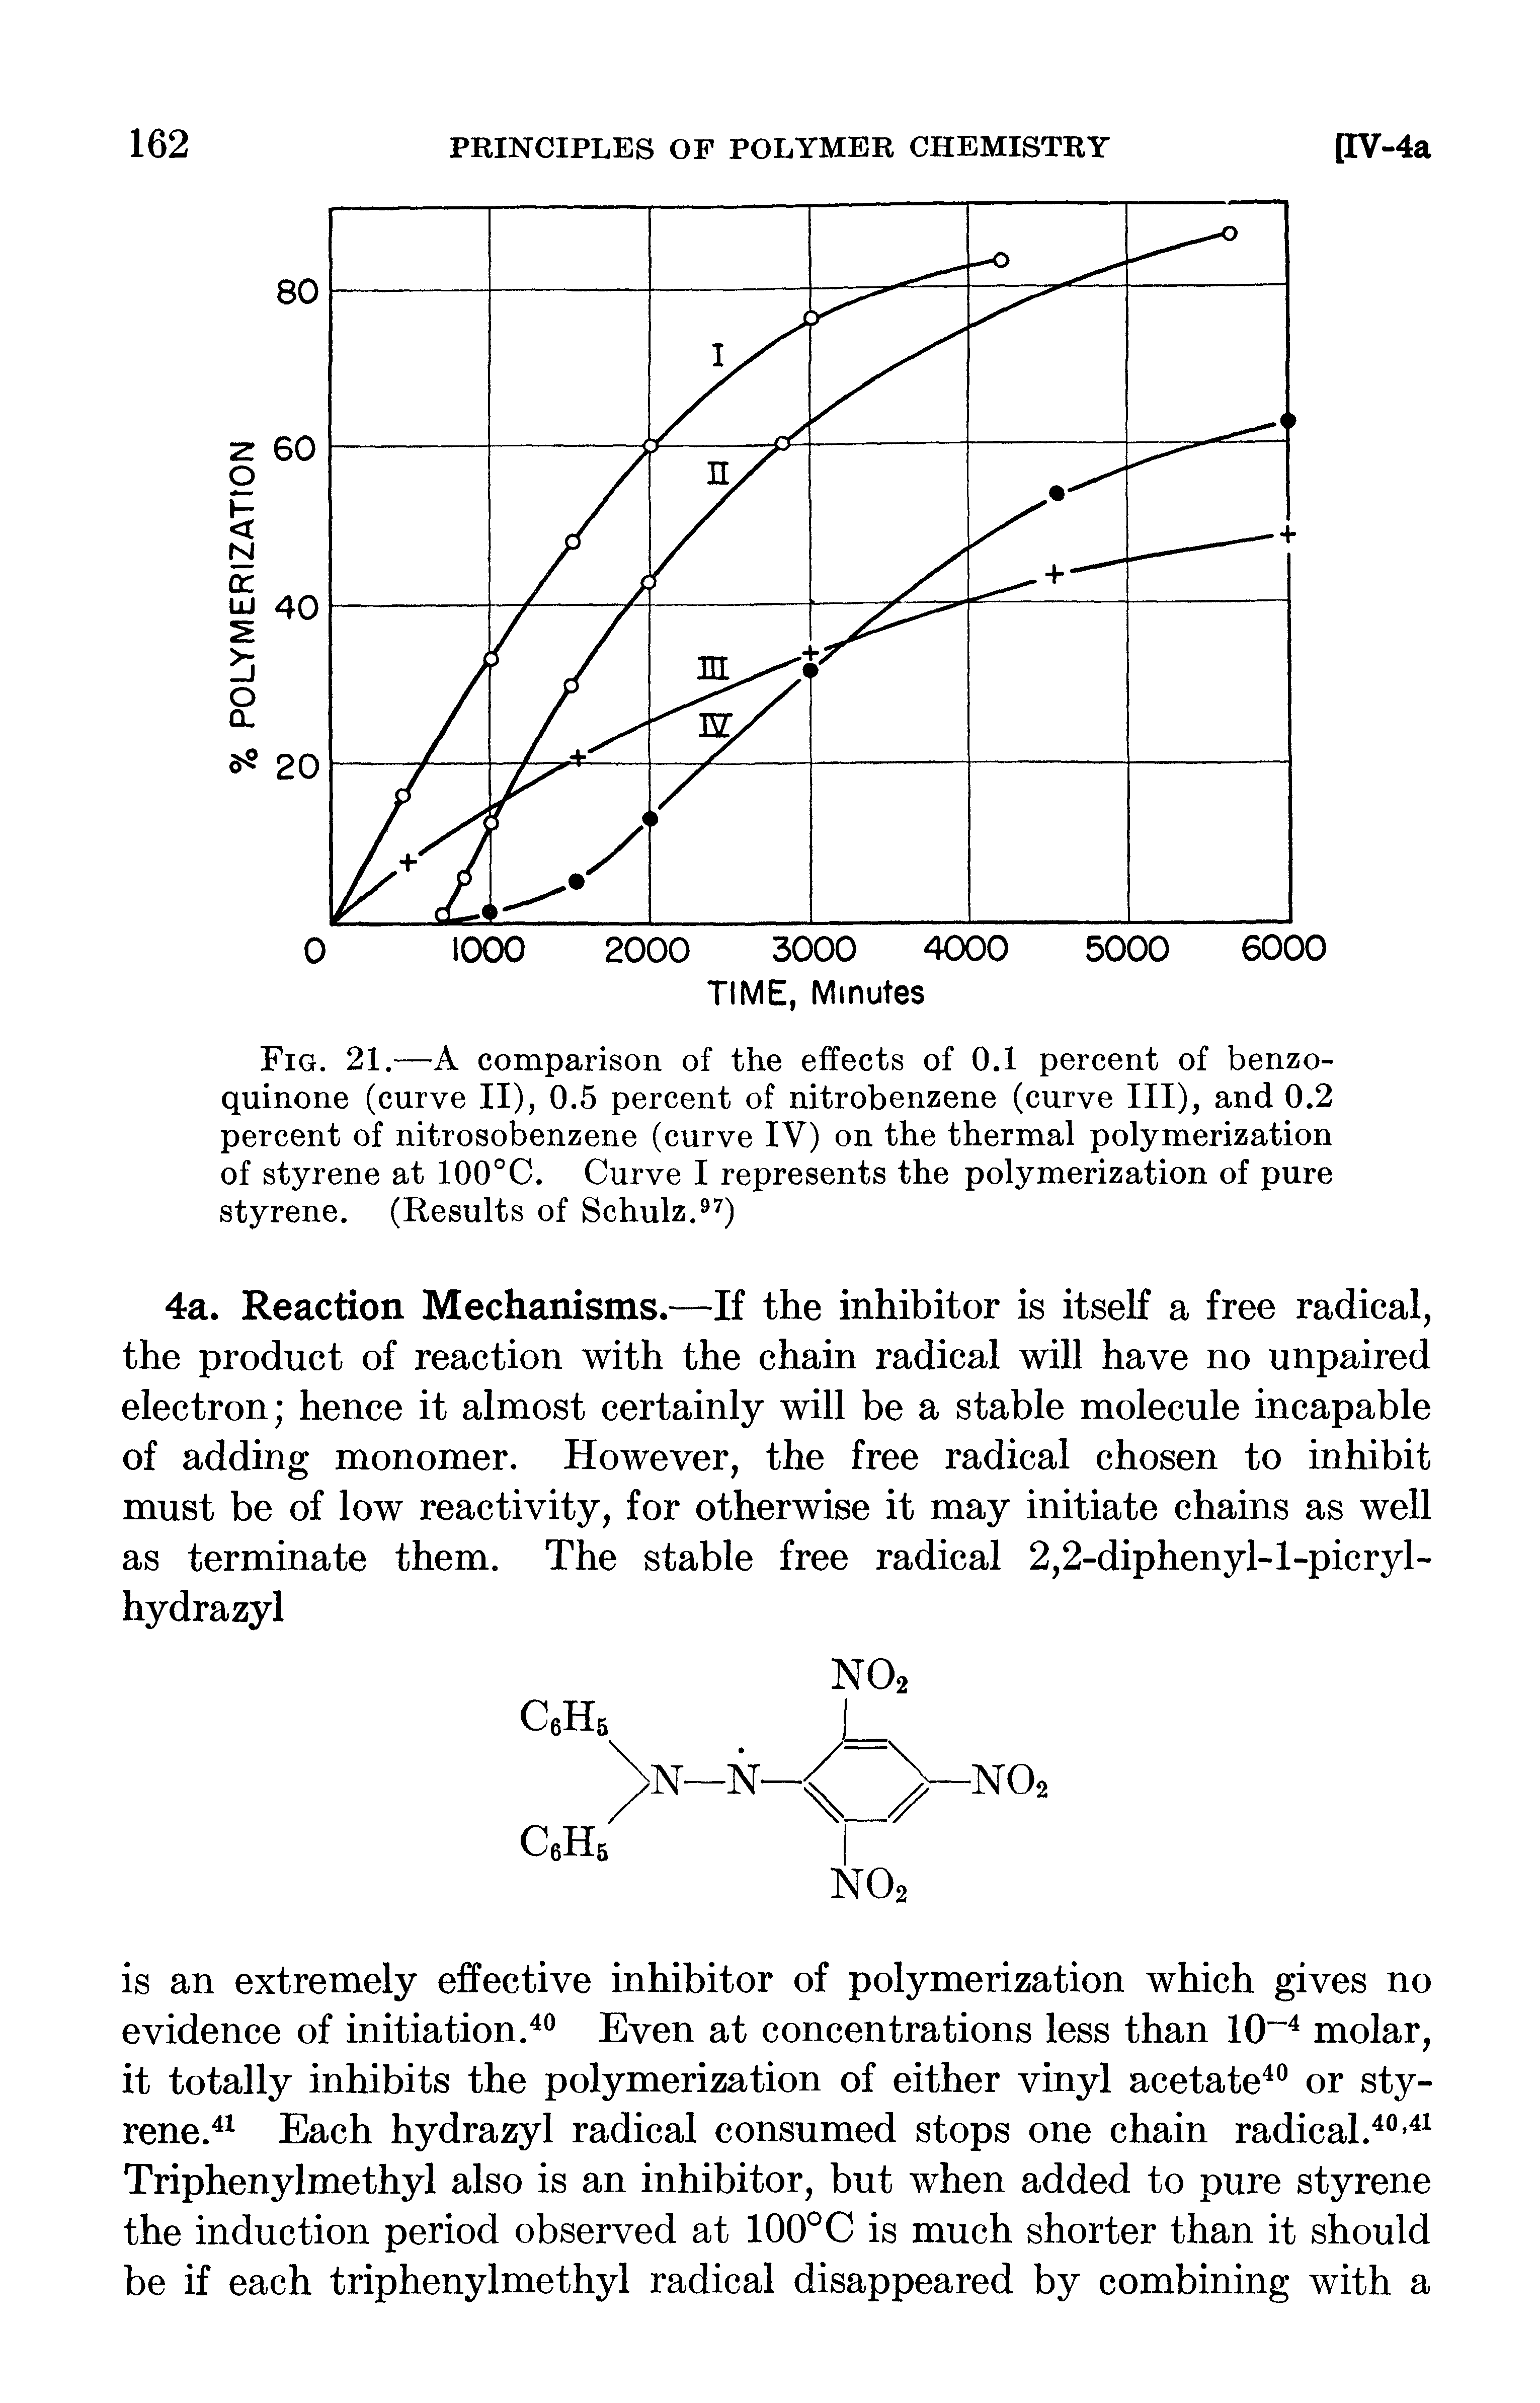 Fig. 21.—A comparison of the effects of 0.1 percent of benzo-quinone (curve II), 0.5 percent of nitrobenzene (curve III), and 0.2 percent of nitrosobenzene (curve IV) on the thermal polymerization of styrene at 100°C. Curve I represents the polymerization of pure styrene. (Results of Schulz. )...